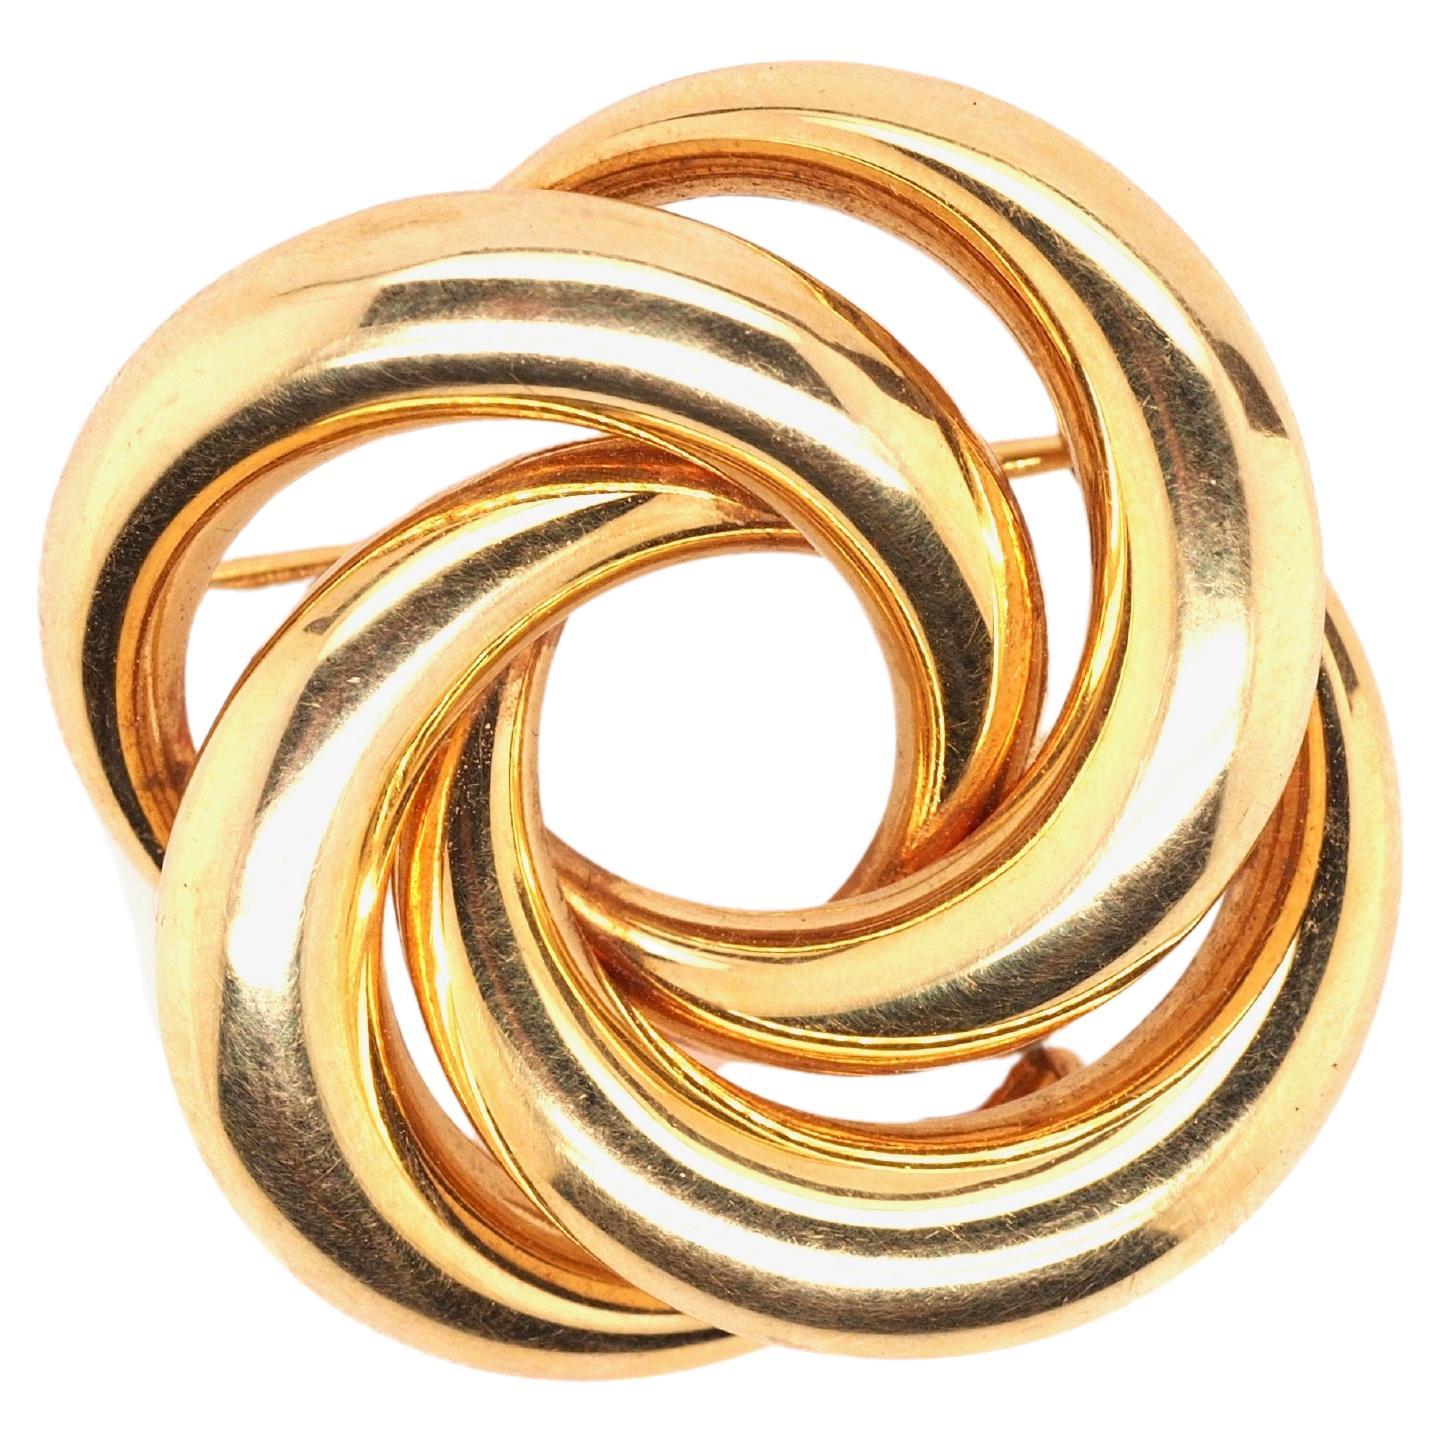 Vintage 14K Yellow Gold 1930s Swirl Brooch with German Hallmarks For Sale